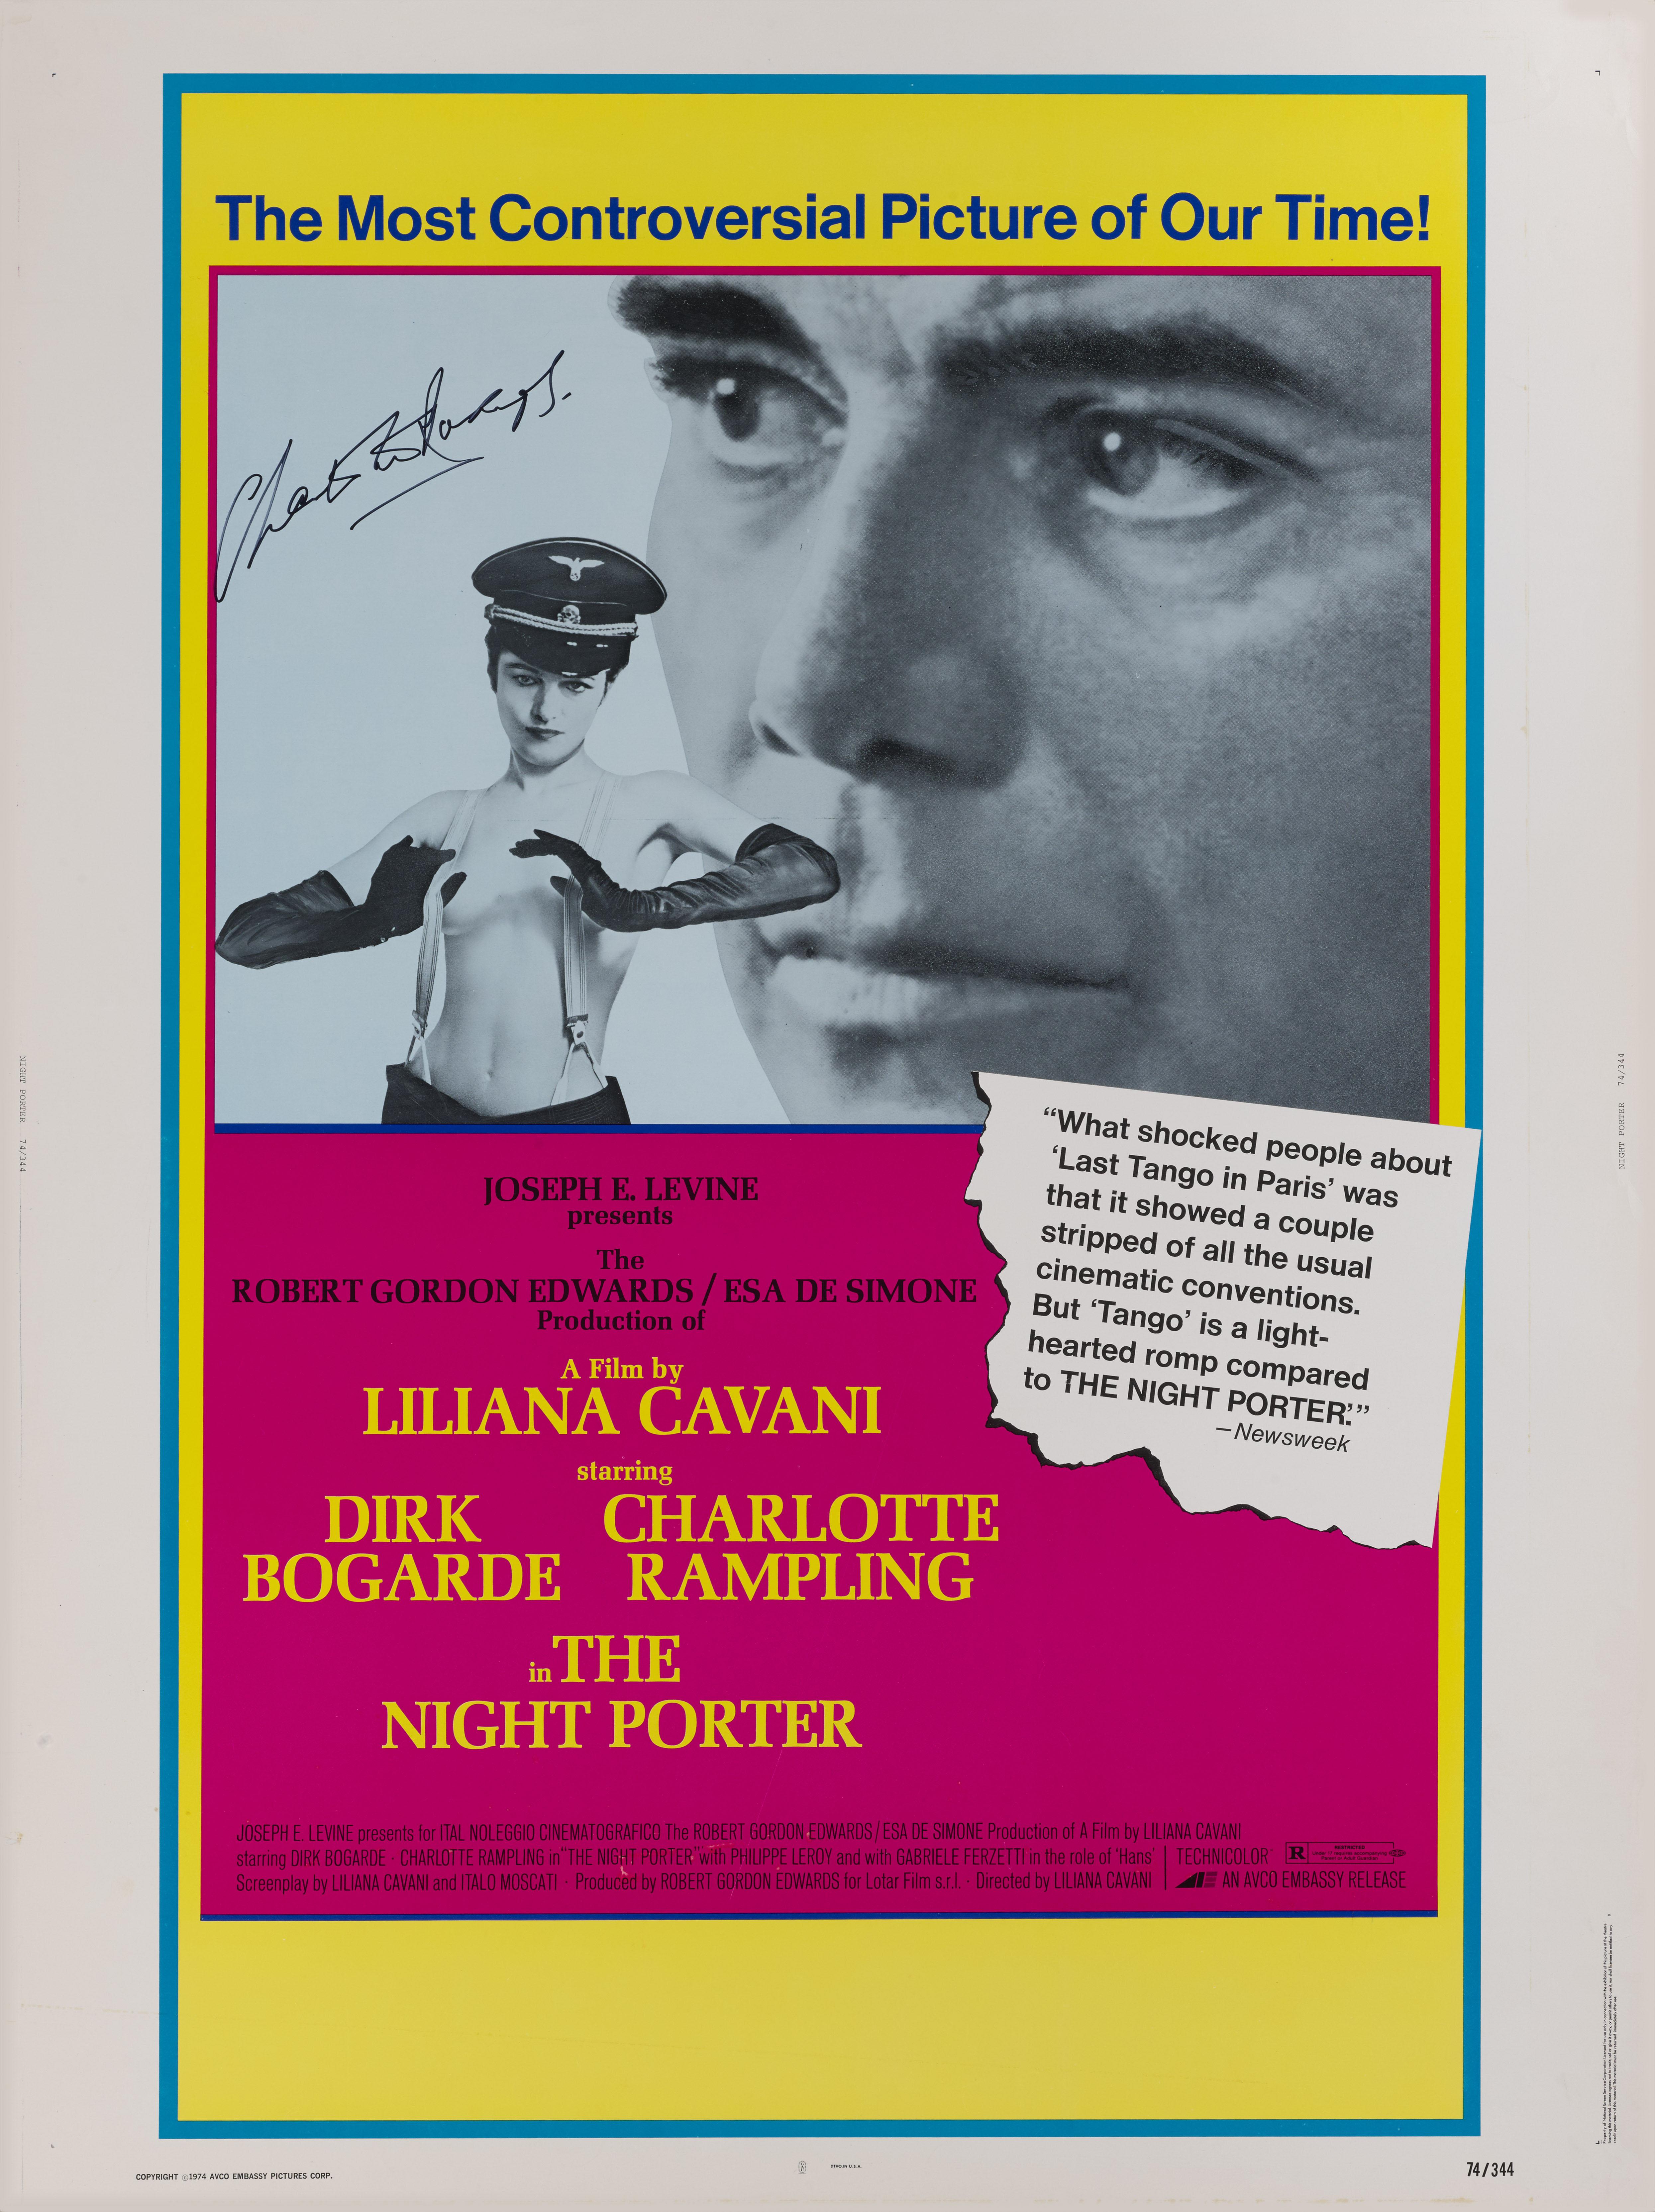 Original US film poster for the 1974 film.
This drama was directed and co-written by Liliana Cavani, and stars Dirk Bogarde, Charlotte Rampling and Philippe Leroy. After a chance meeting at a Viennese hotel thirteen years after World War II,